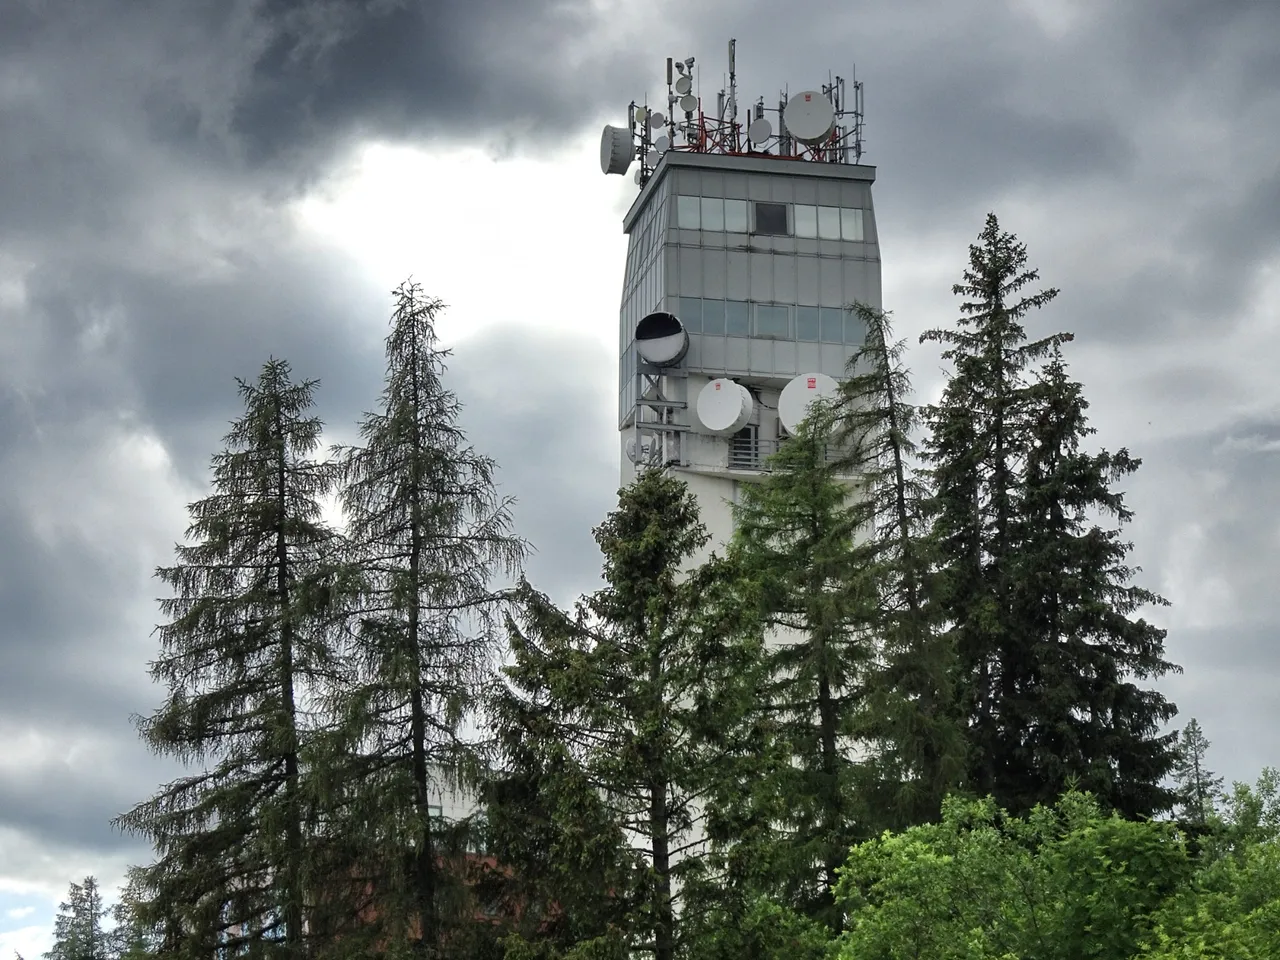 The tower of the weater station